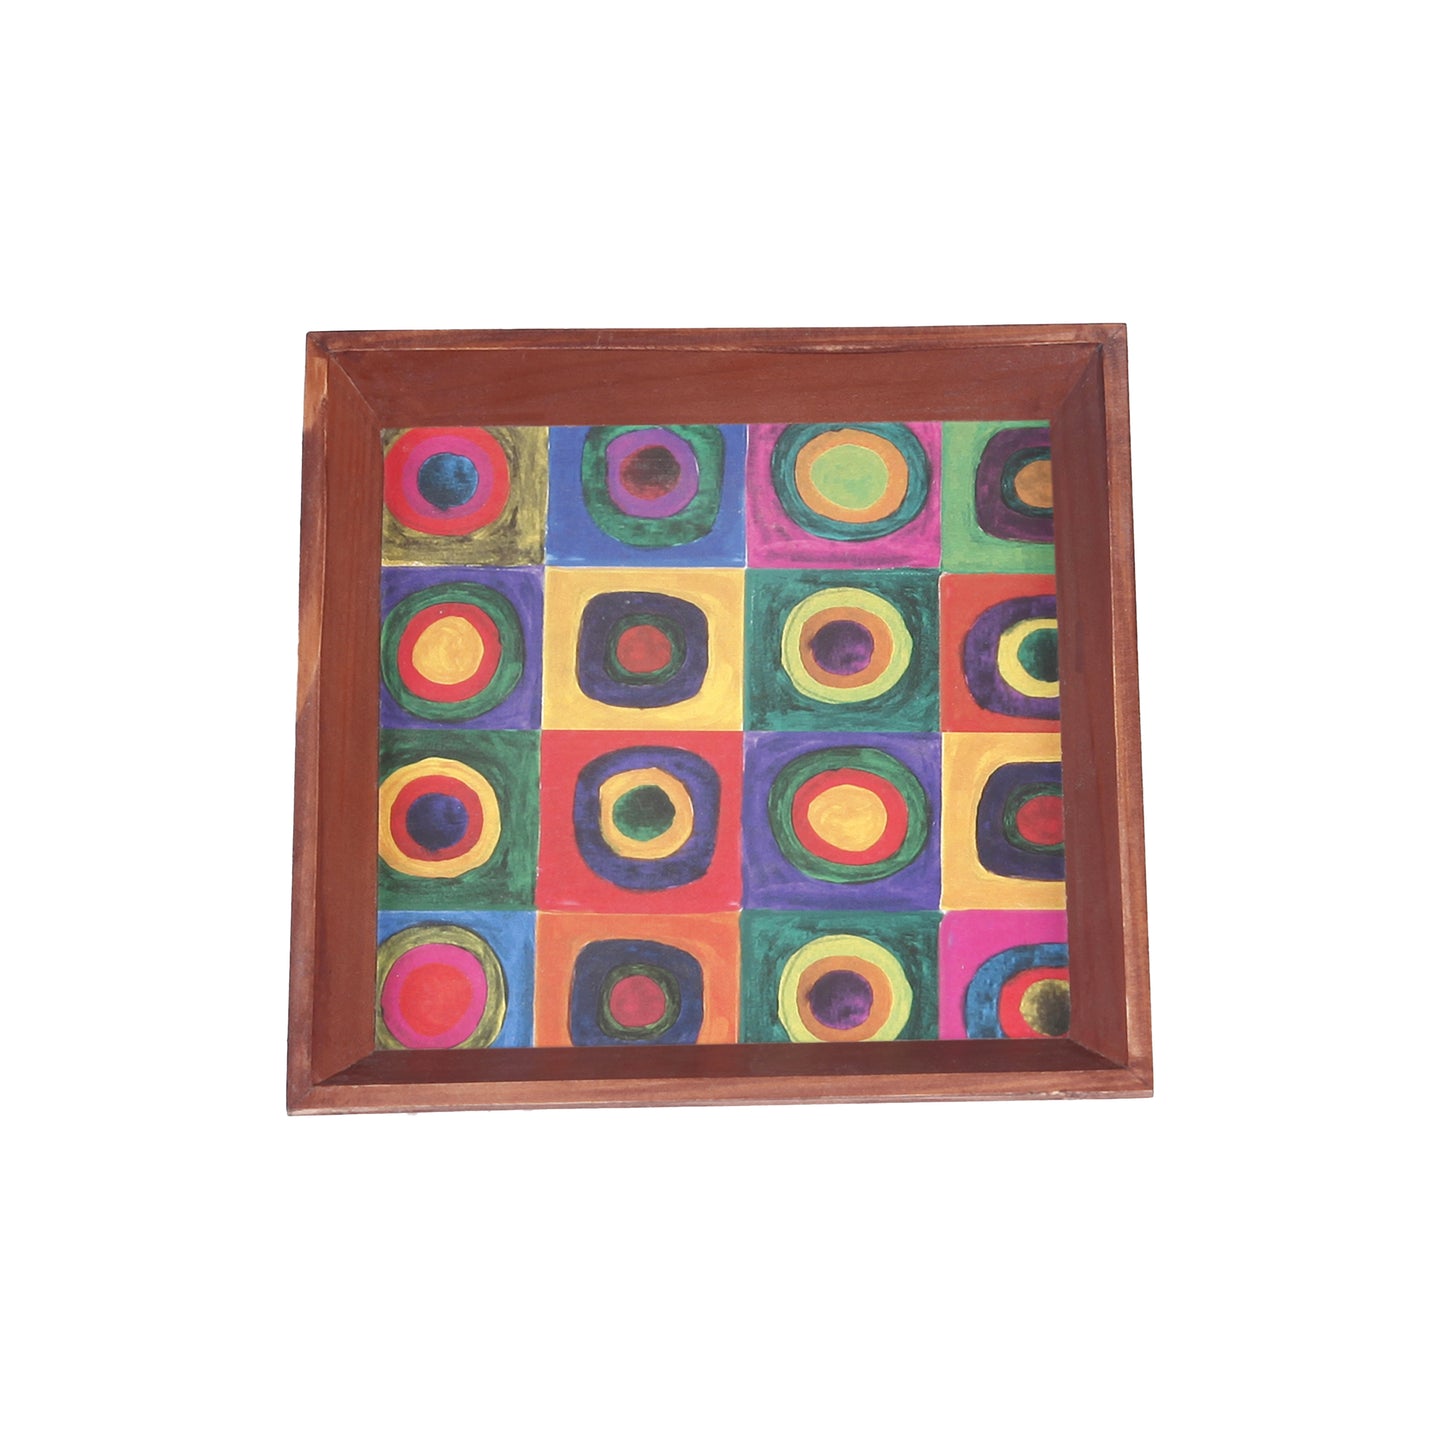 A Tiny Mistake Modern Art Small Square Wooden Serving Tray, 18 x 18 x 2 cm